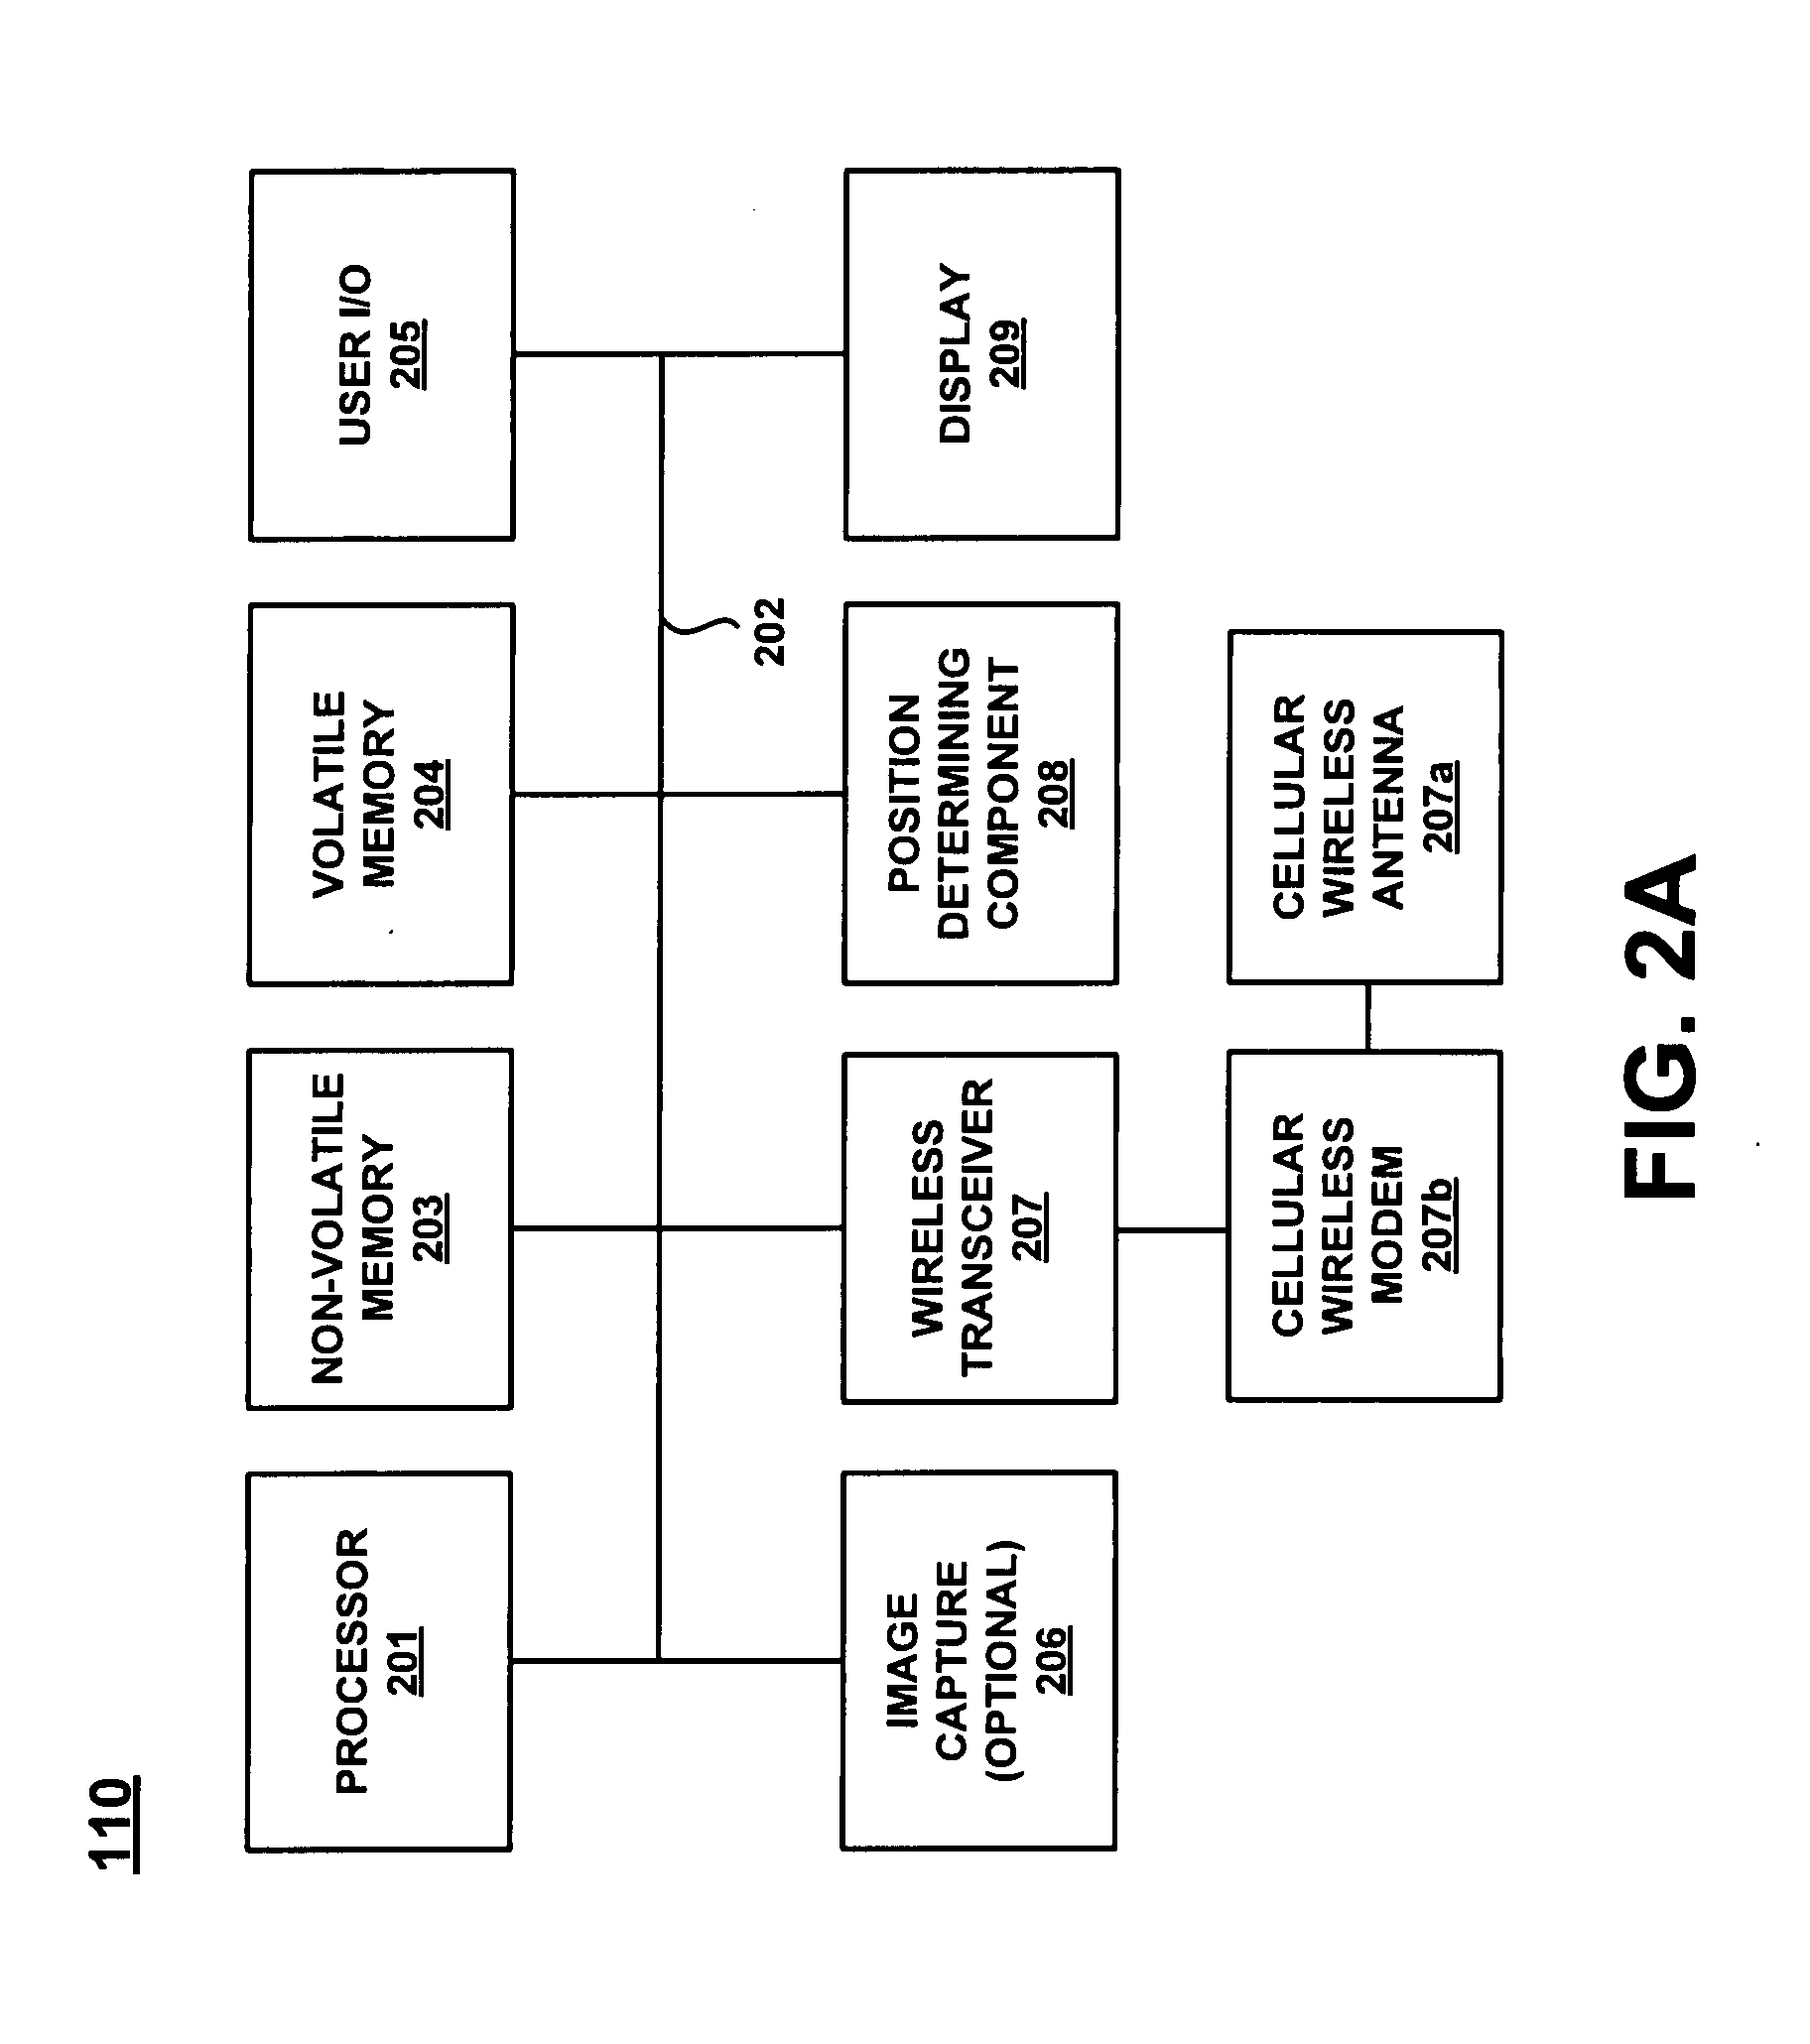 Method and system for upgrading a legacy cellular device